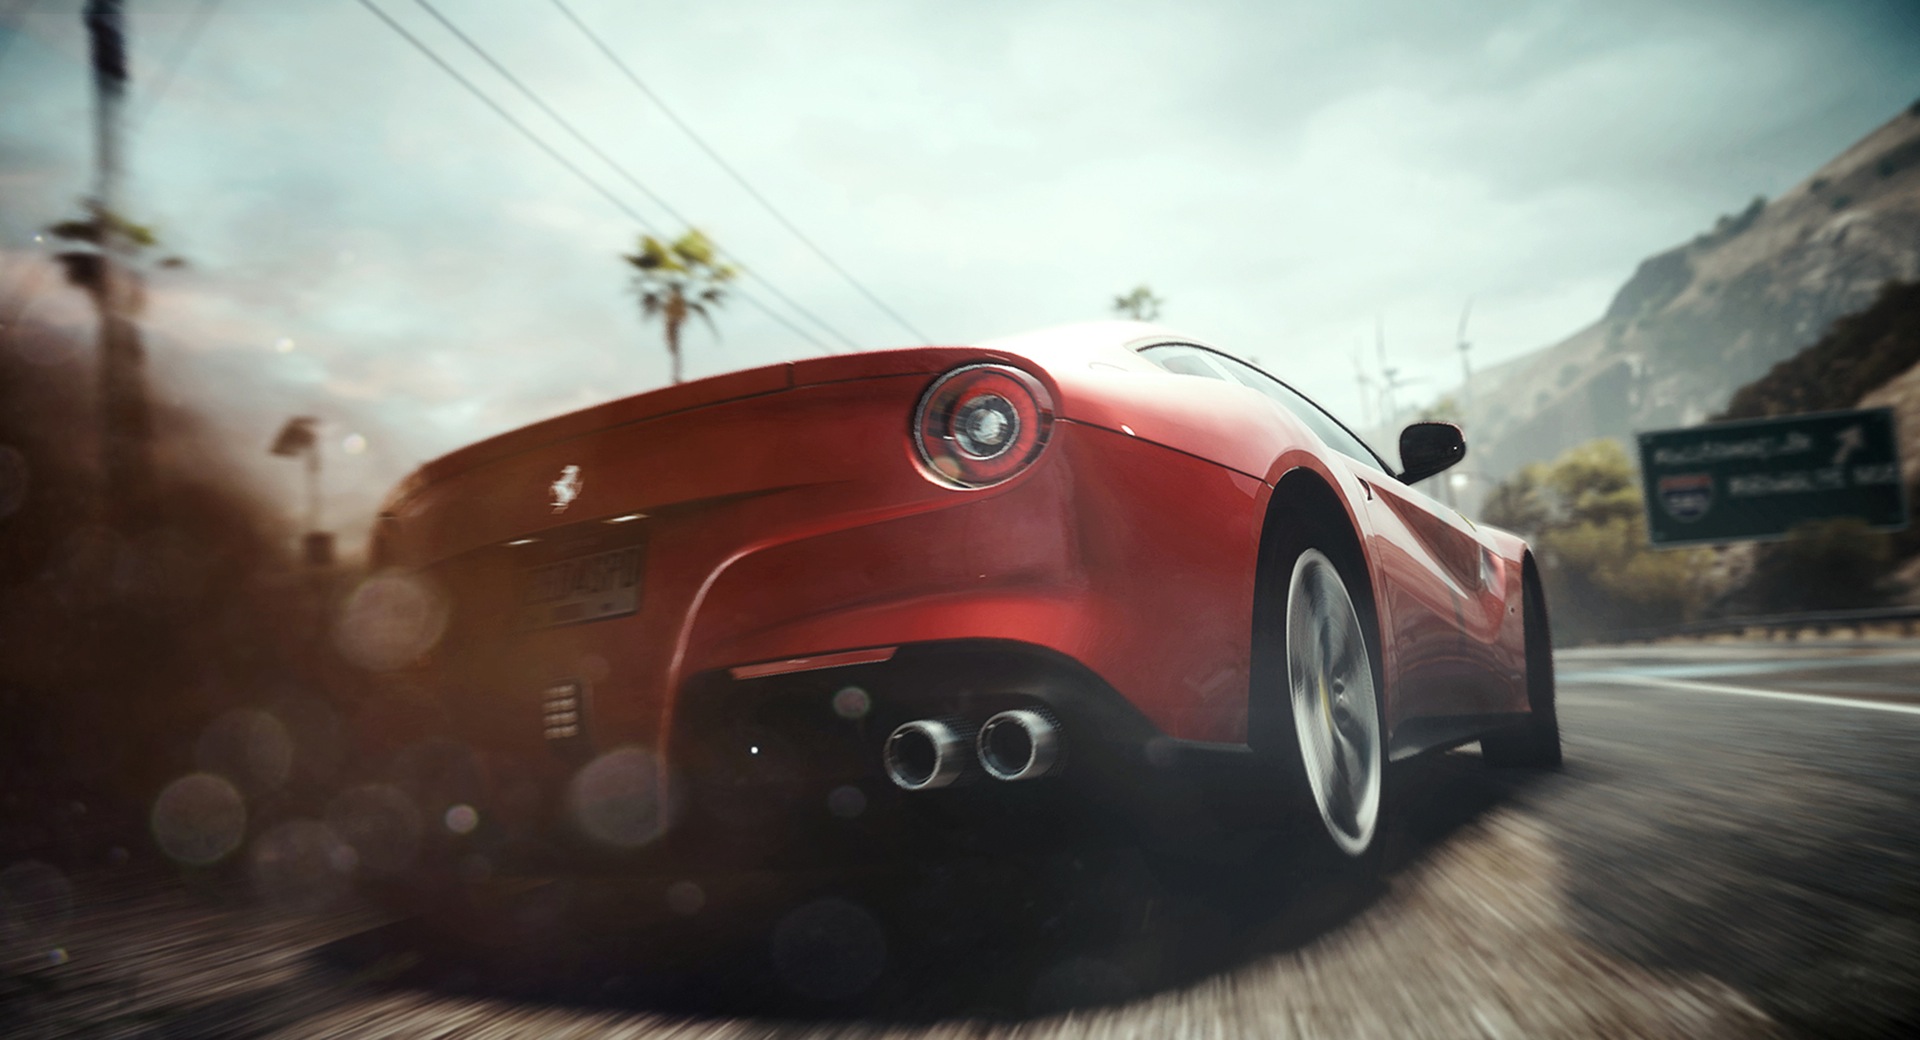 Need for Speed Rivals screenshot 309